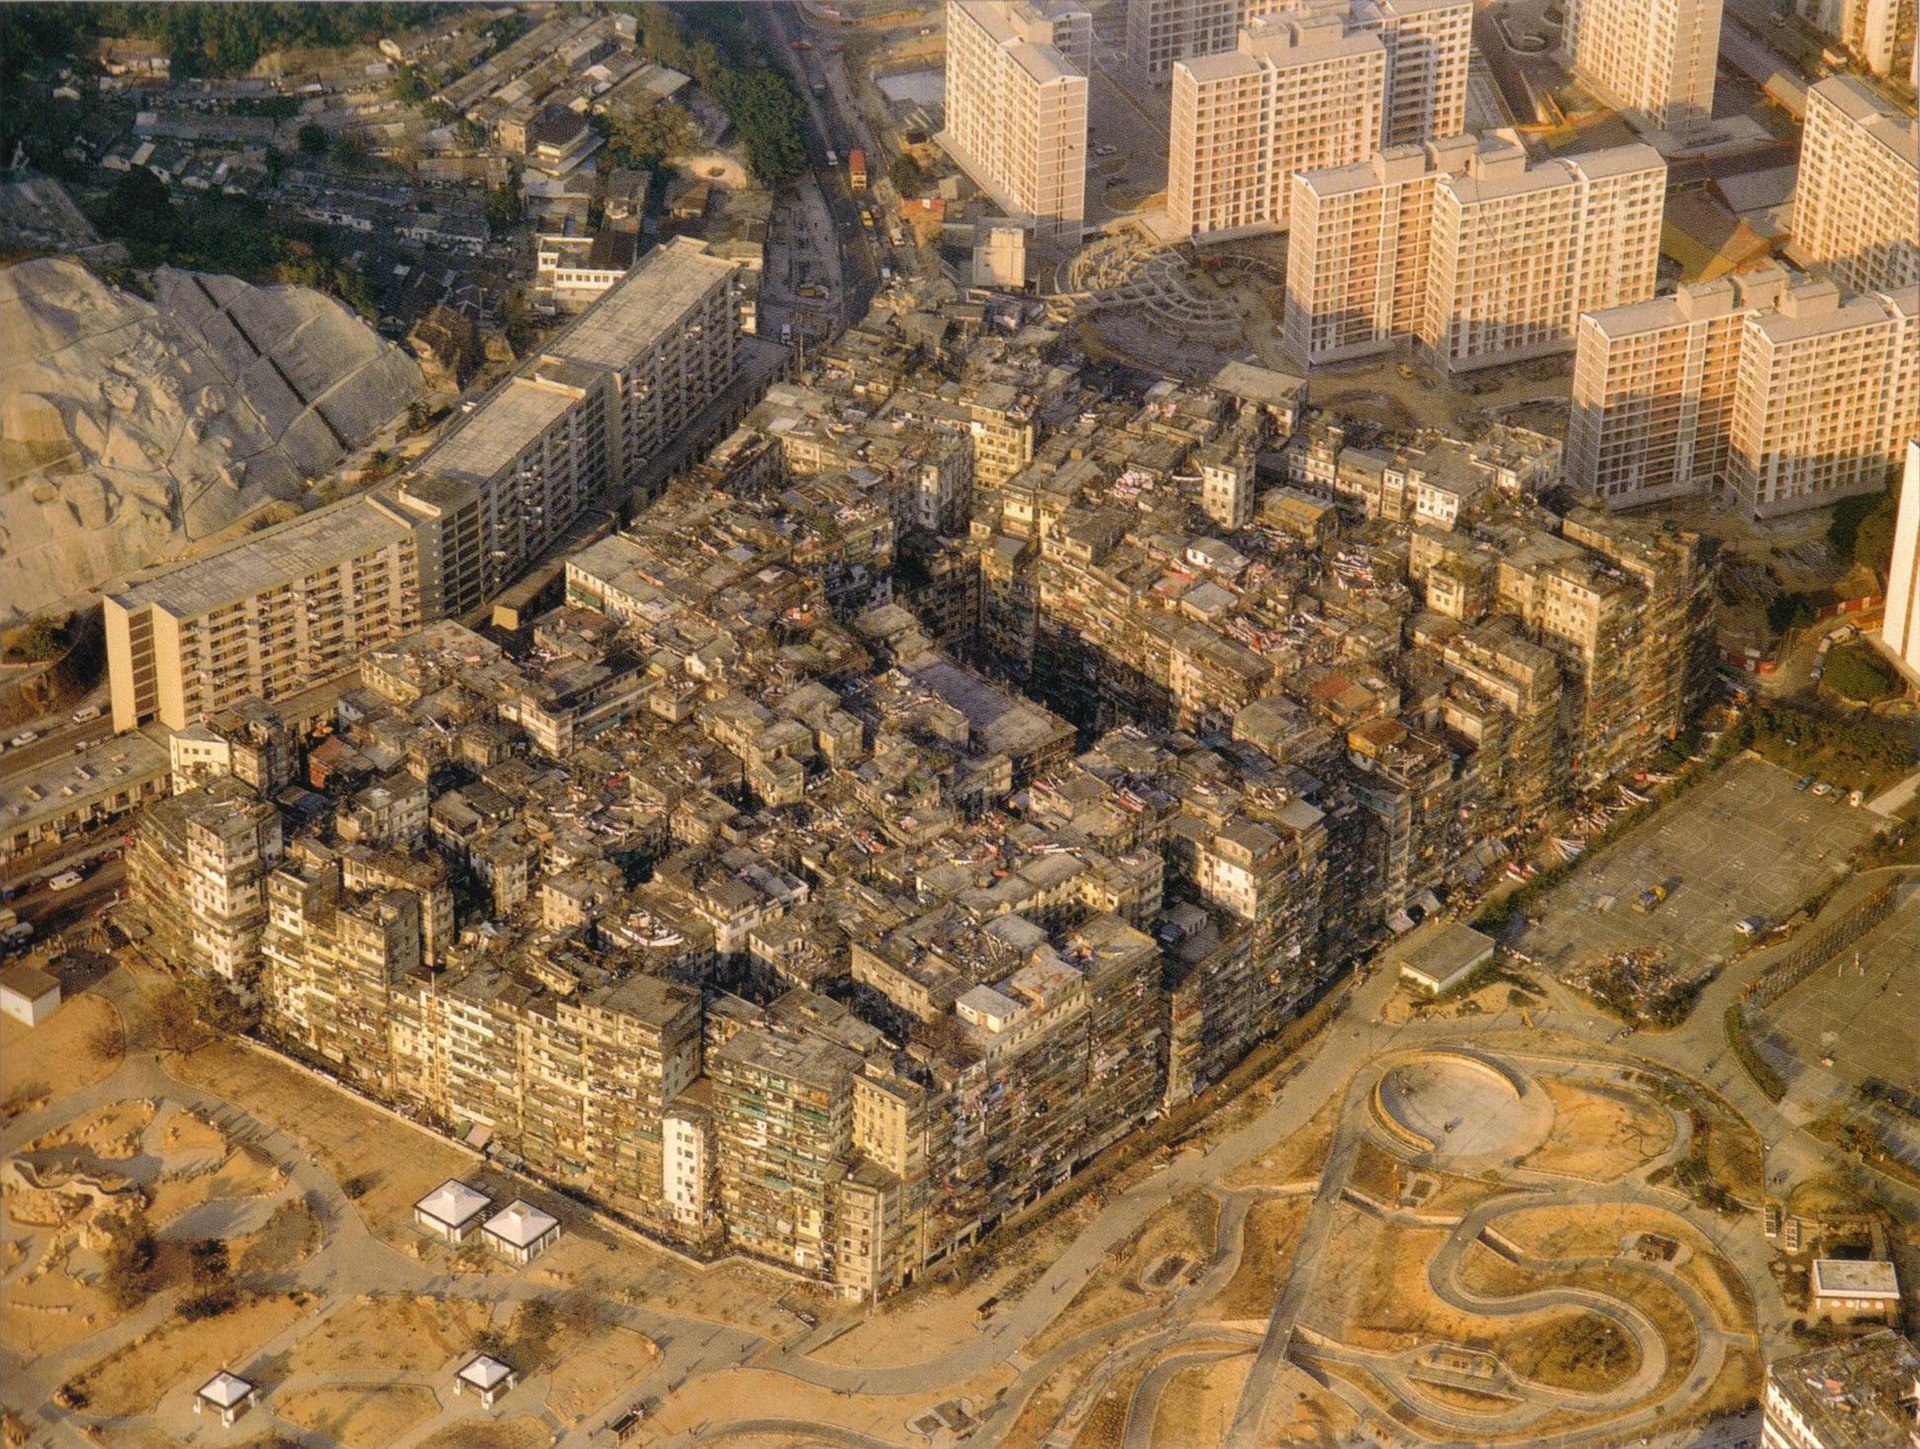 Kowloon Walled City Editorial